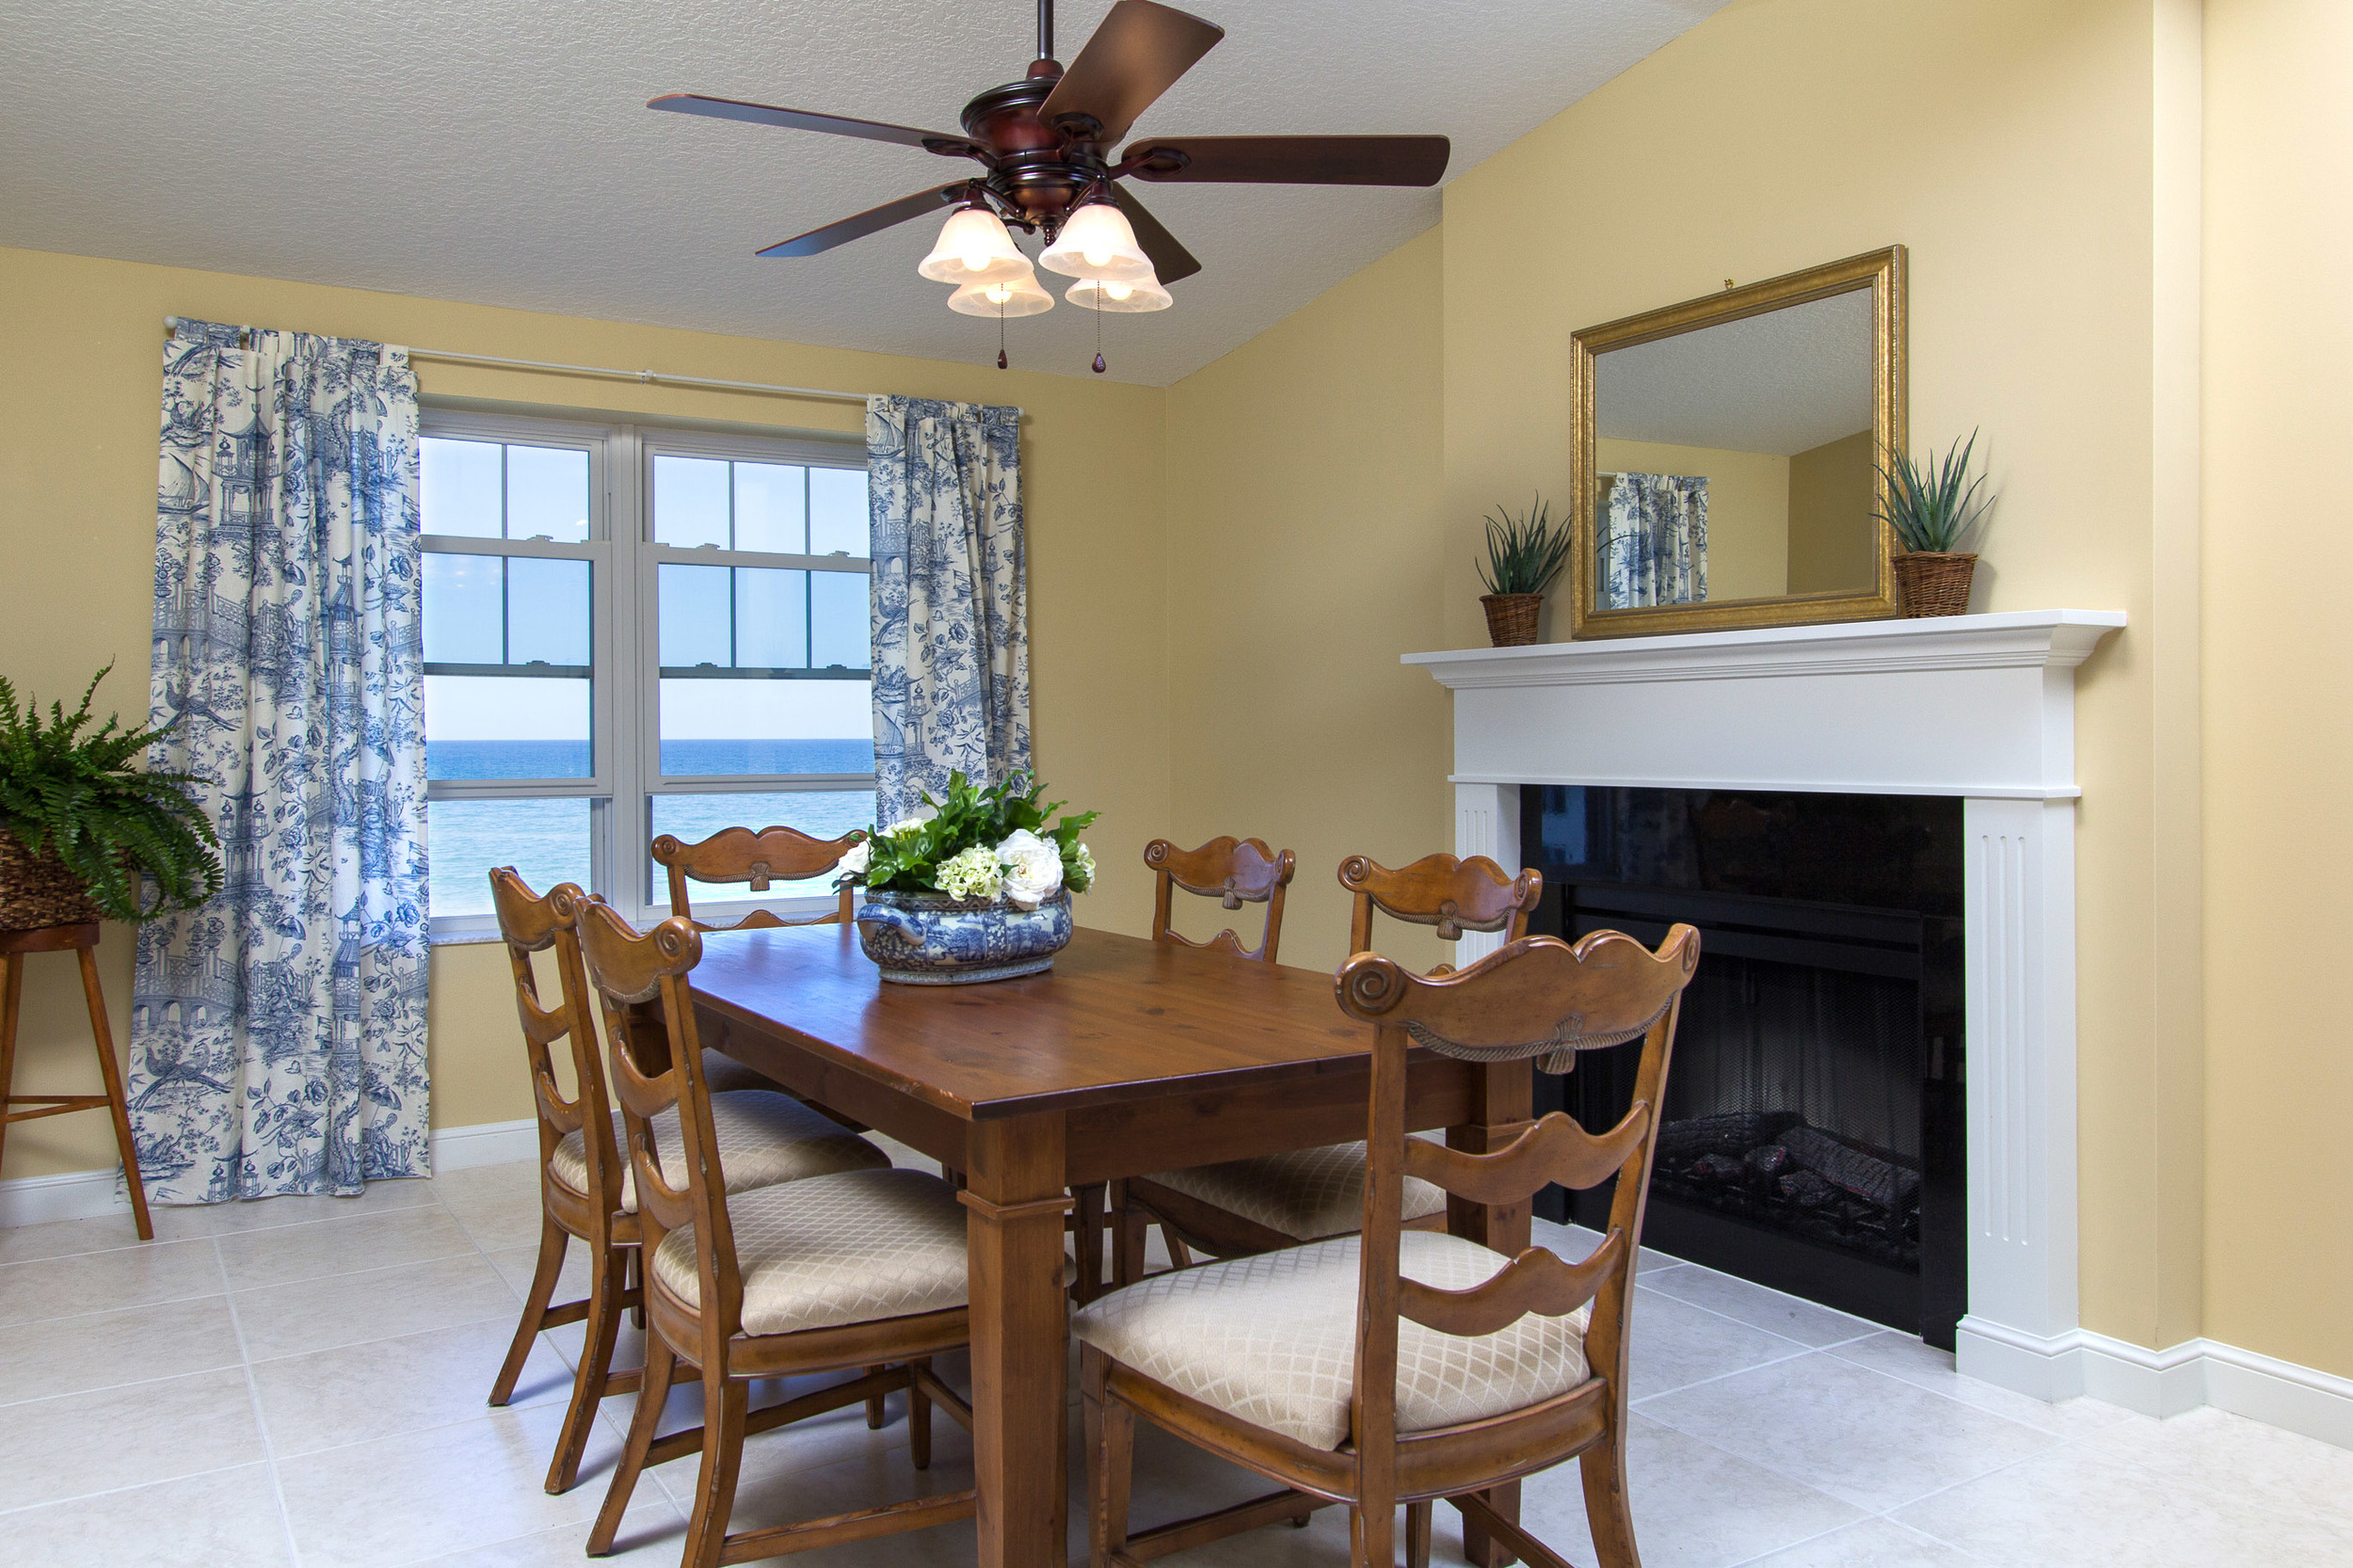 Dining area adjacent to a fireplace and ocean views